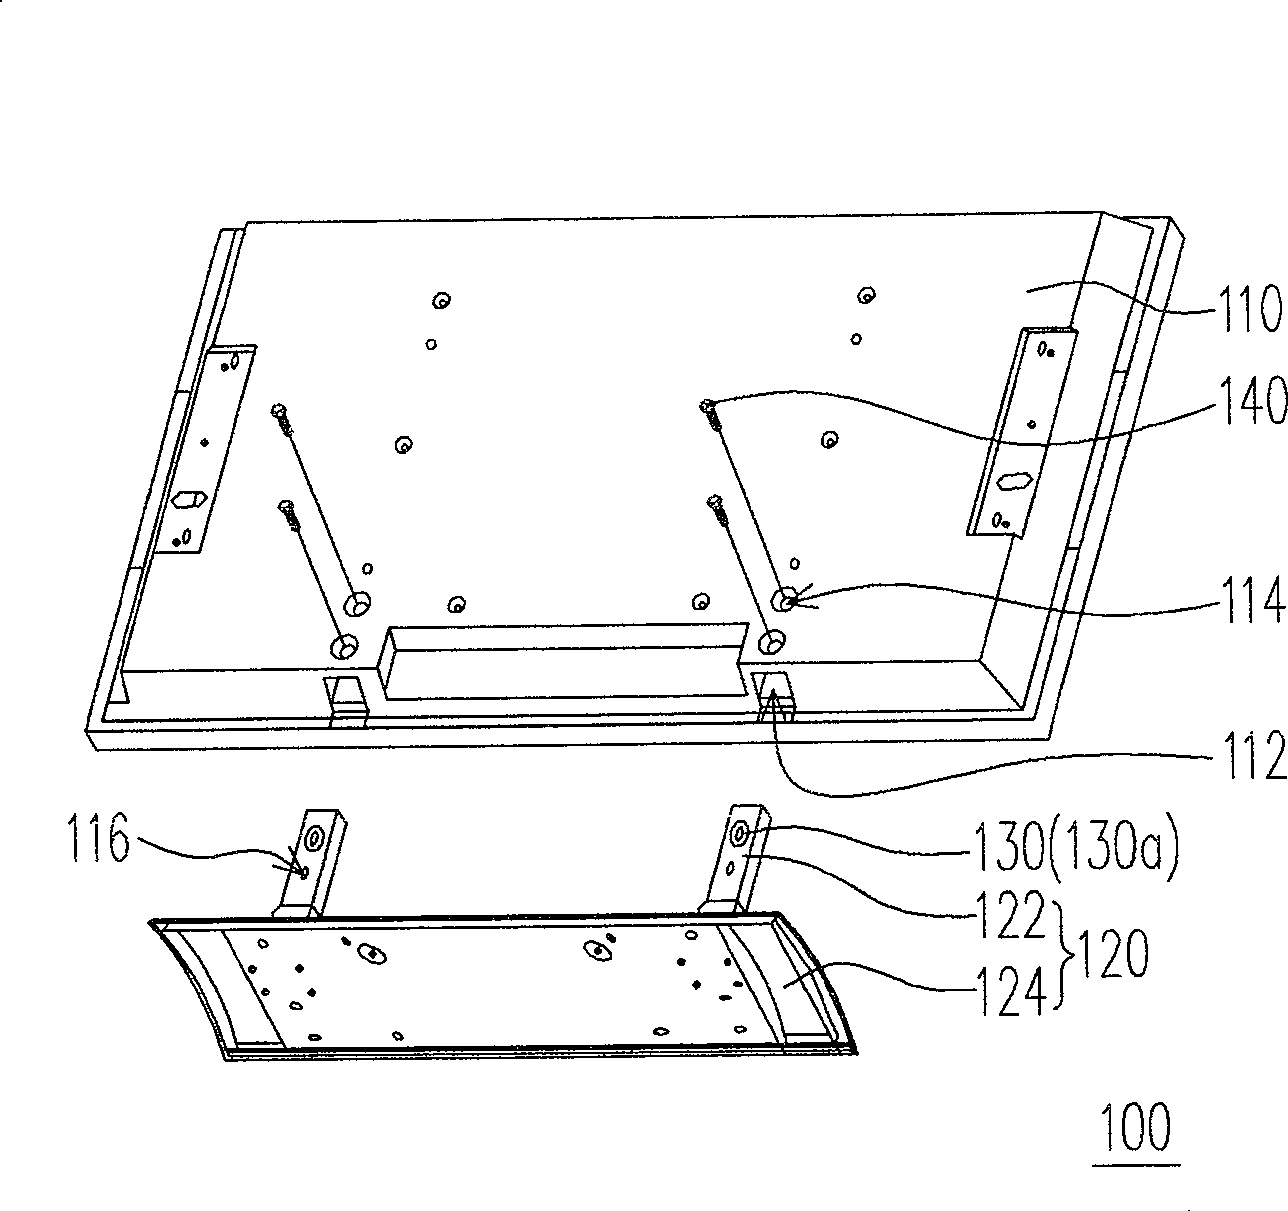 Display and electronic device